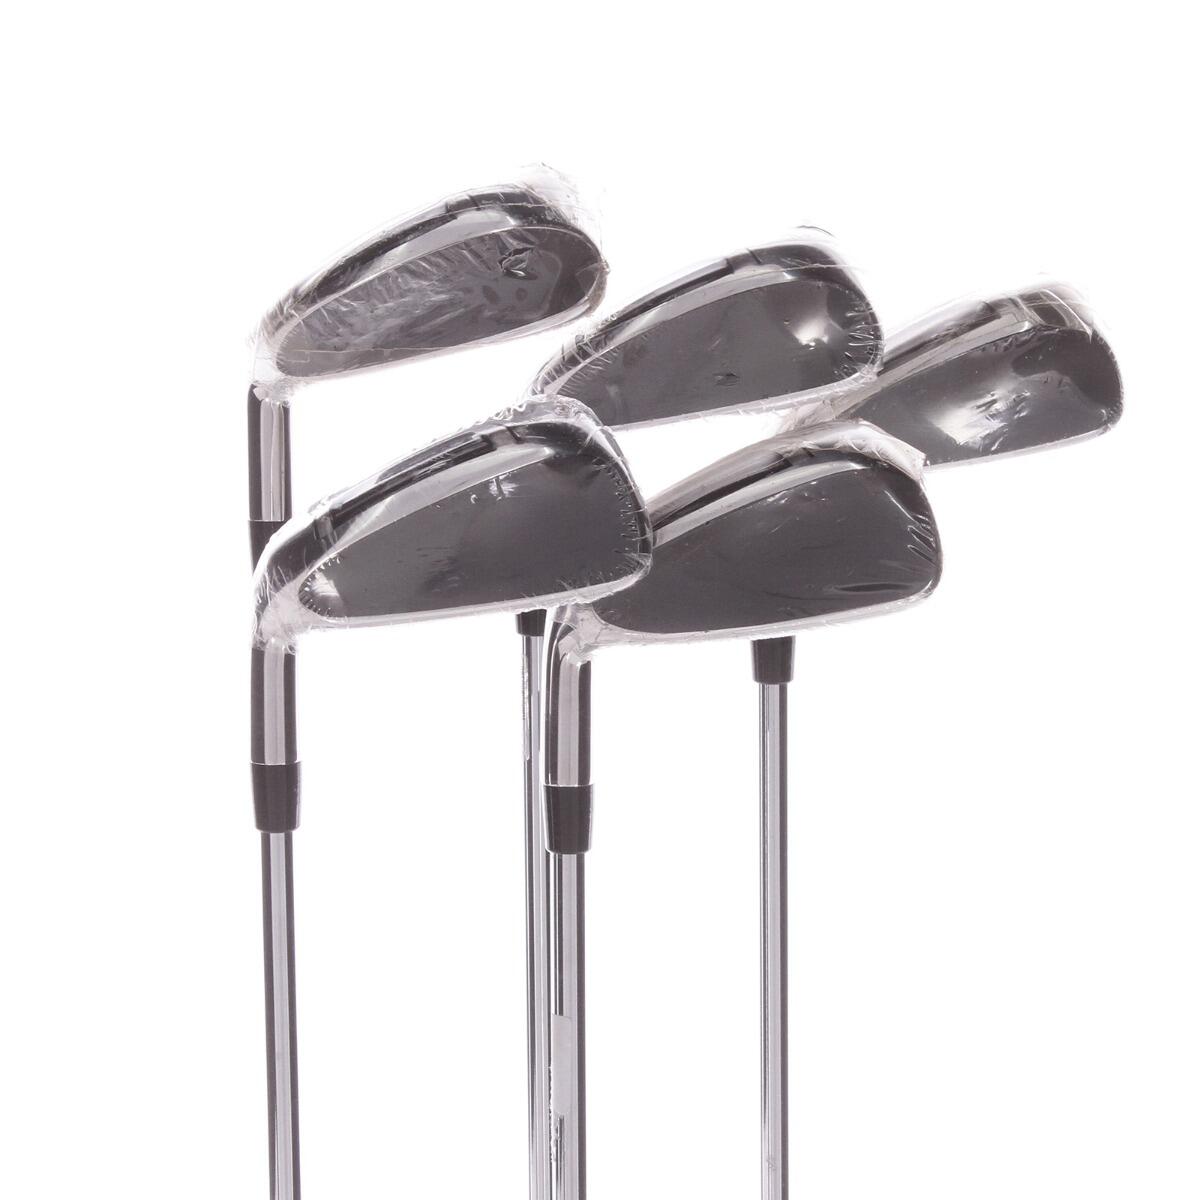 USED - Iron Set 5-9-iron Cleveland Launcher HB Steel Shaft Left Handed - GRADE A 1/7